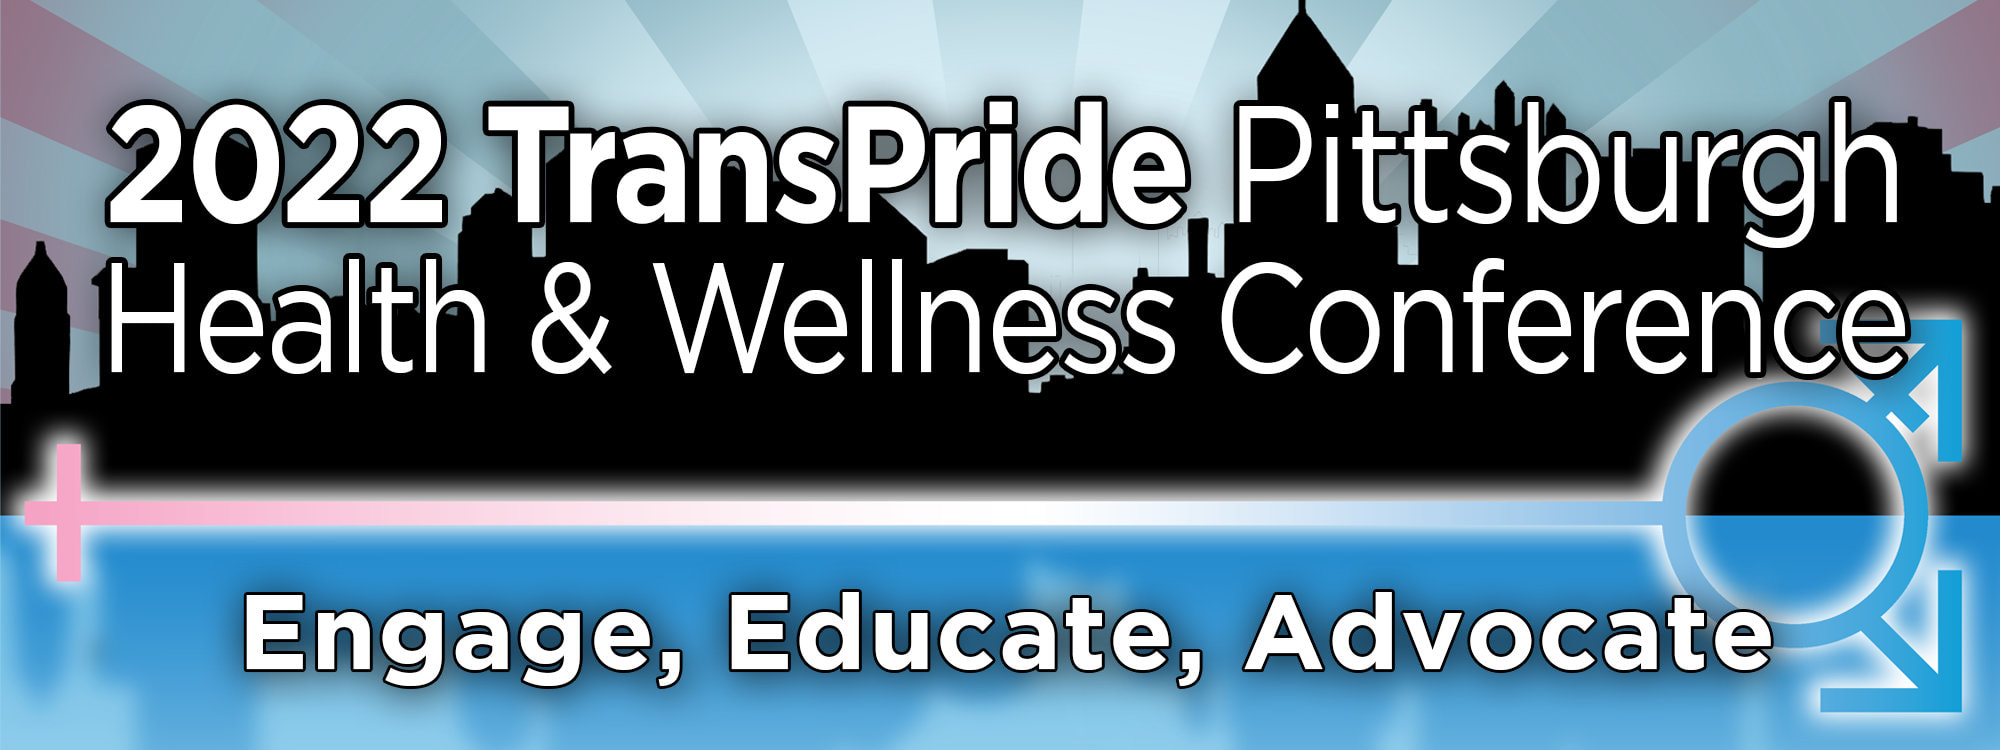 2022 TransPride Pittsburgh Health and Wellness Conference banner. The images has the title over a graphic silhouette of the city with a transgender symbol and the tagline that says Engage, Educate, Advocate. 